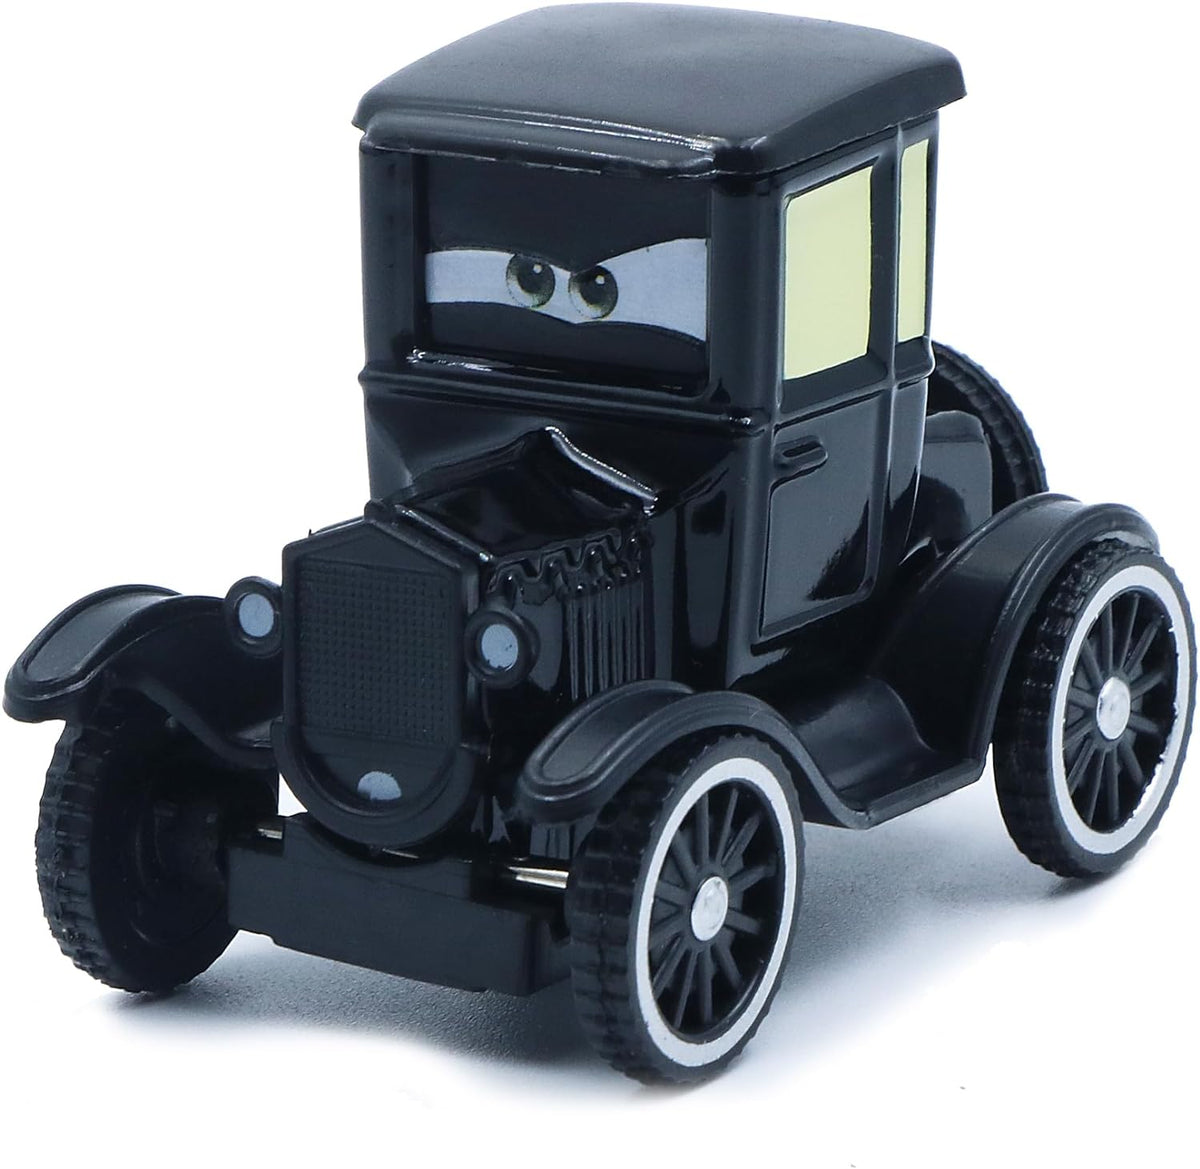 Car Toy 2 3 The King Portable Vehicles, 1:55 Diecast Model Mini Vehical, Compact Portable & Collectible Car Toys